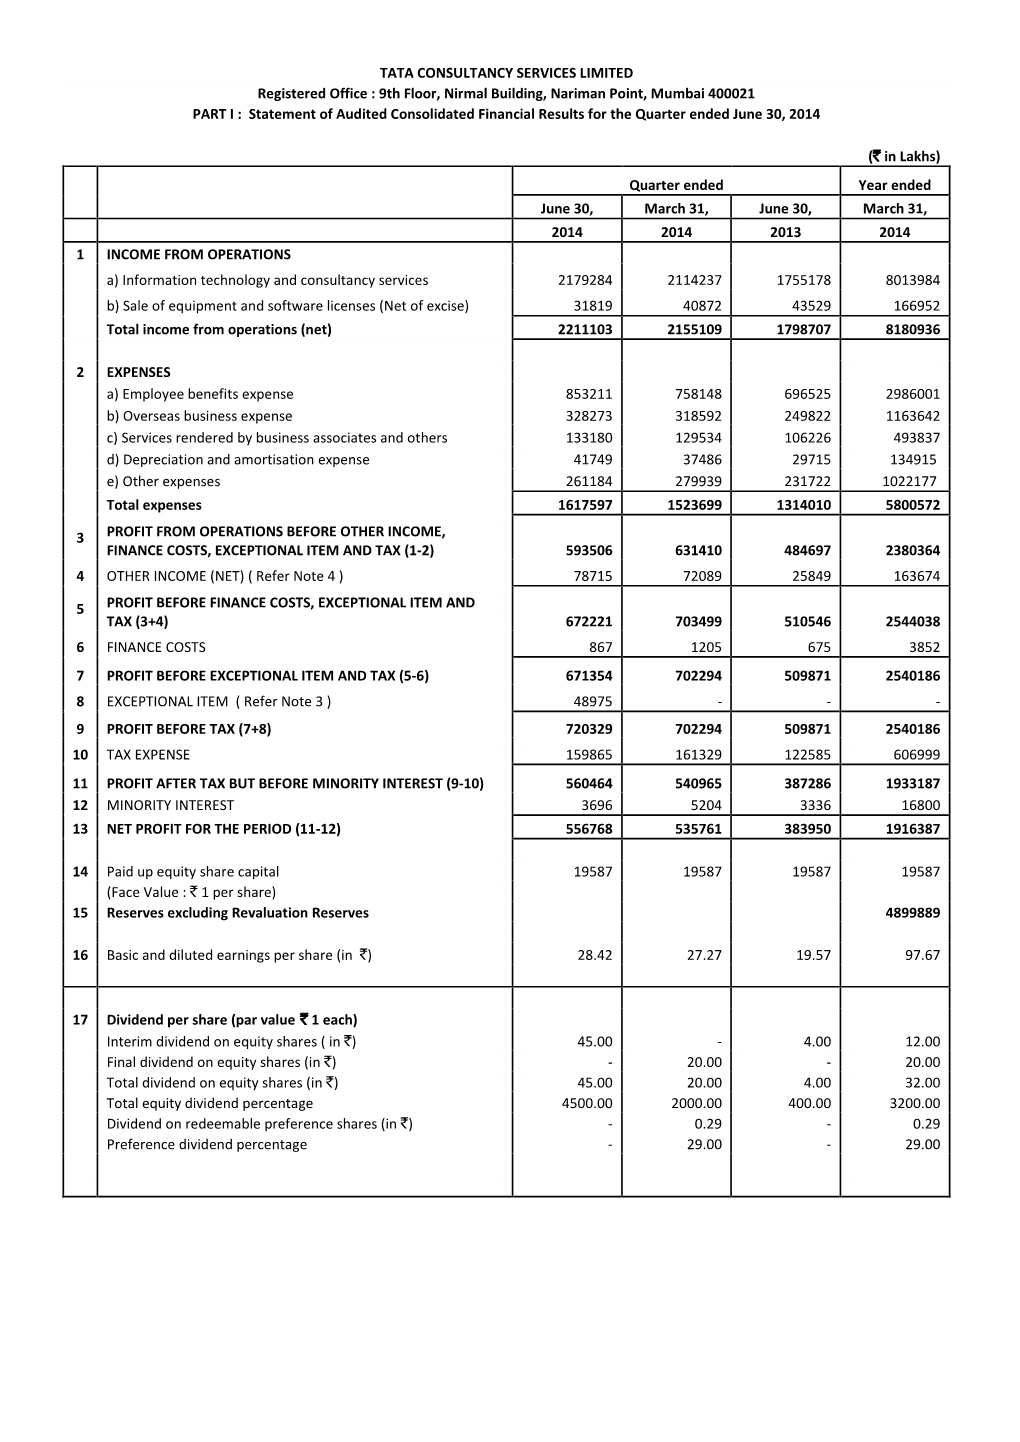 9Th Floor, Nirmal Building, Nariman Point, Mumbai 400021 PART I : Statement of Audited Consolidated Financial Results for the Quarter Ended June 30, 2014